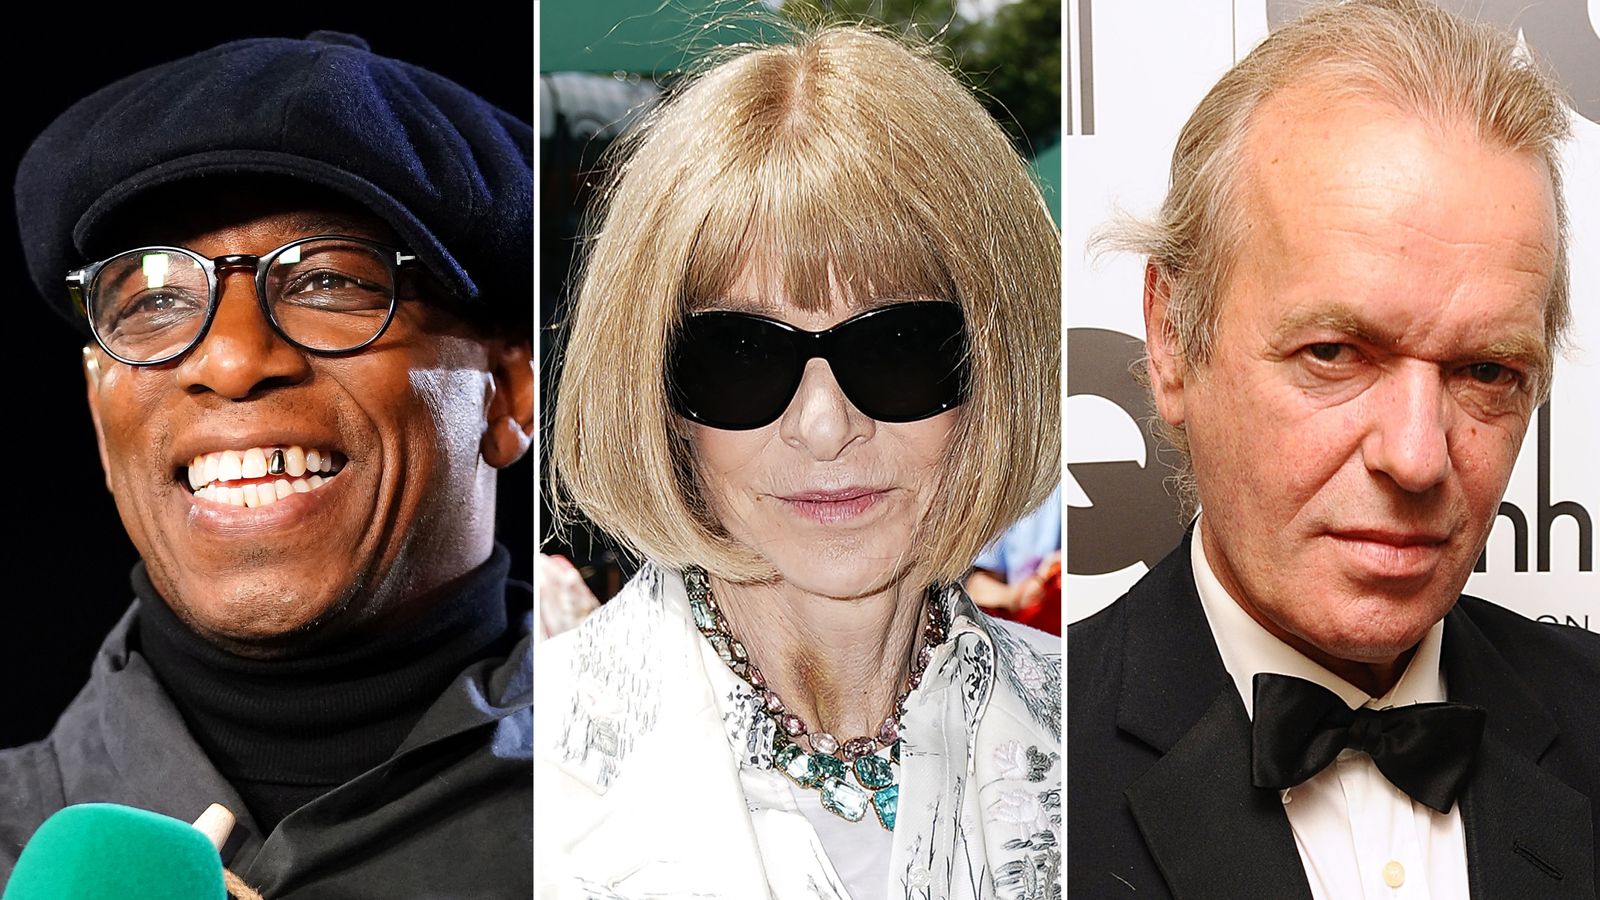 King's first Birthday Honours recognise football legend Ian Wright, Vogue editor Anna Wintour and late novelist Martin Amis